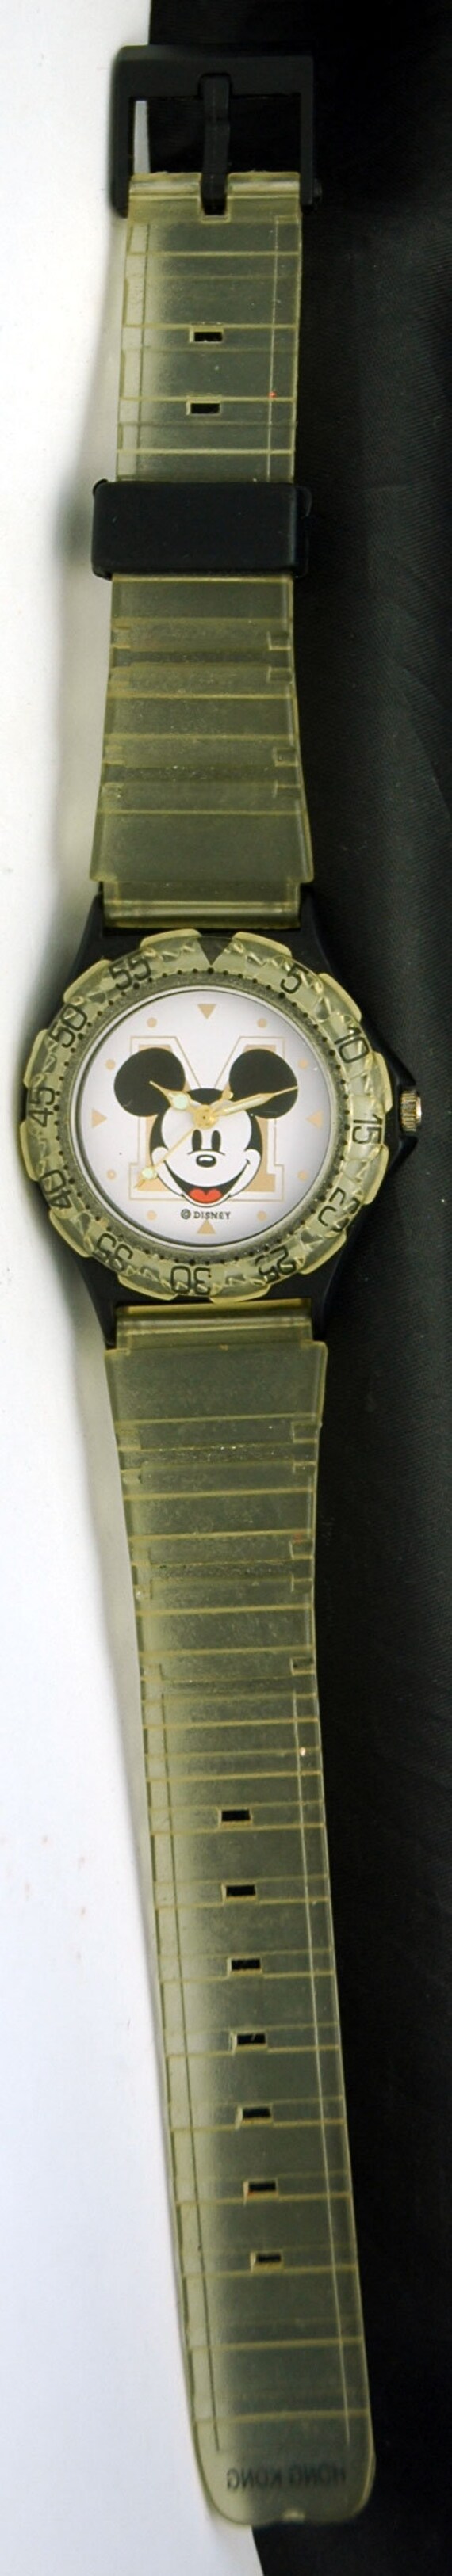 MICKEY MOUSE Sport WATCH x Fossil Disney Store Di… - image 6